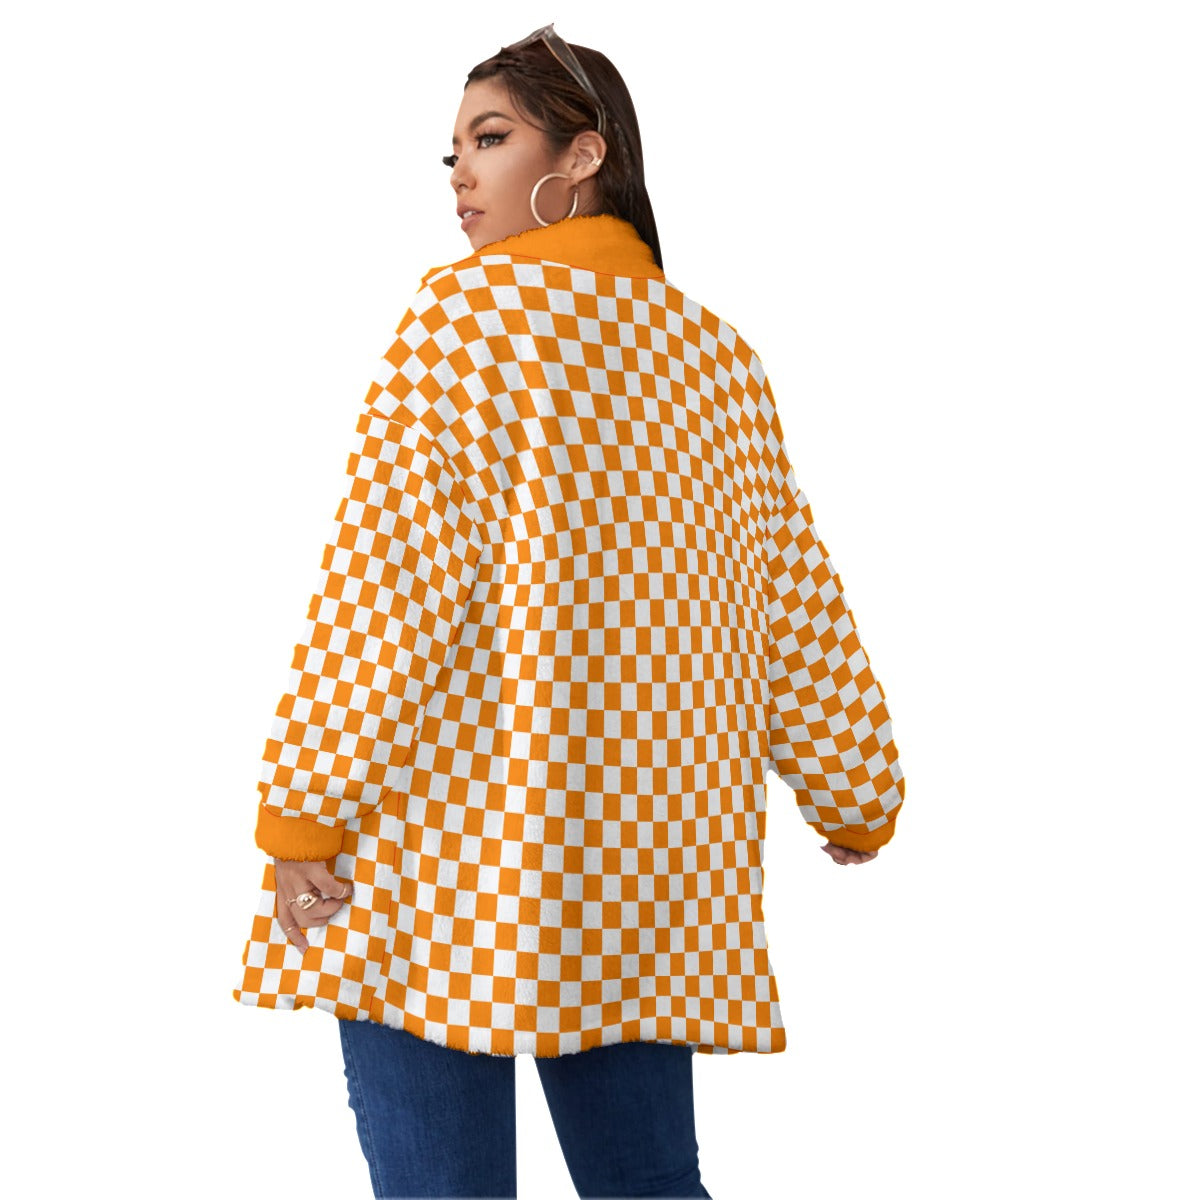 Checkerboard Borg Fleece Stand-up Collar Jacket With Zipper Closure(Plus Size)